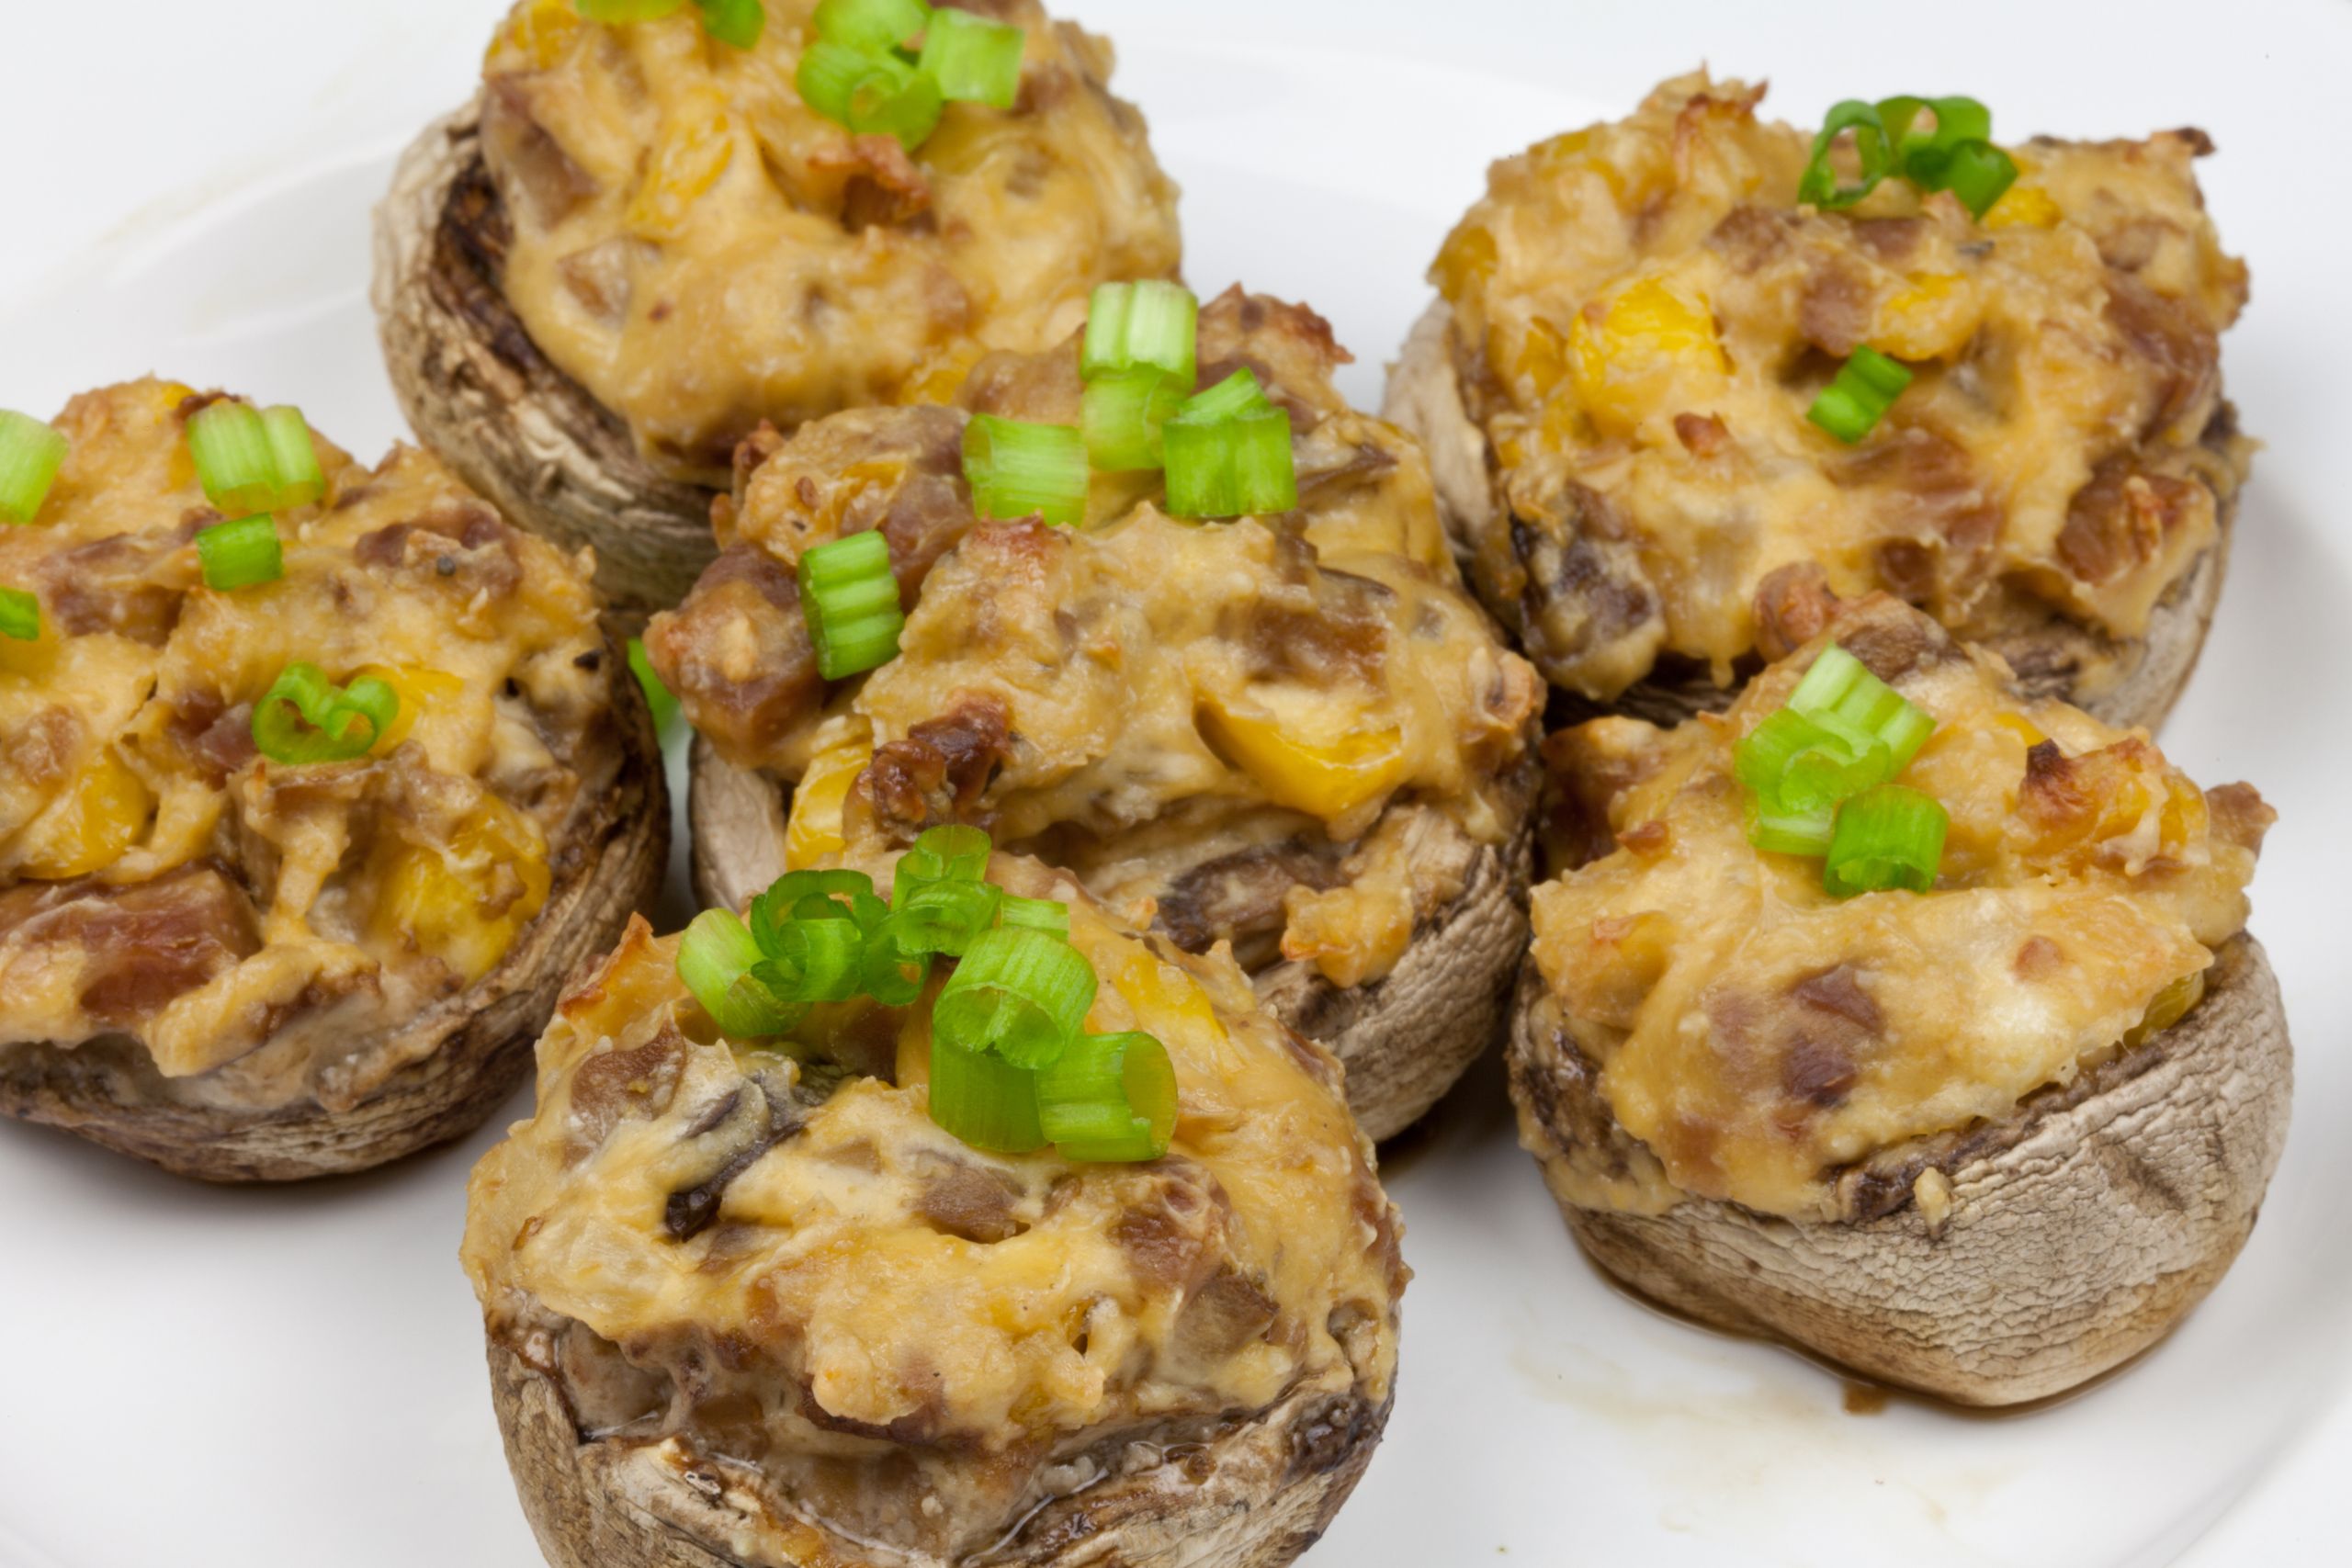 Stuffed Mushrooms With Cream Cheese And Bacon
 Bacon and Cream Cheese Stuffed Mushrooms